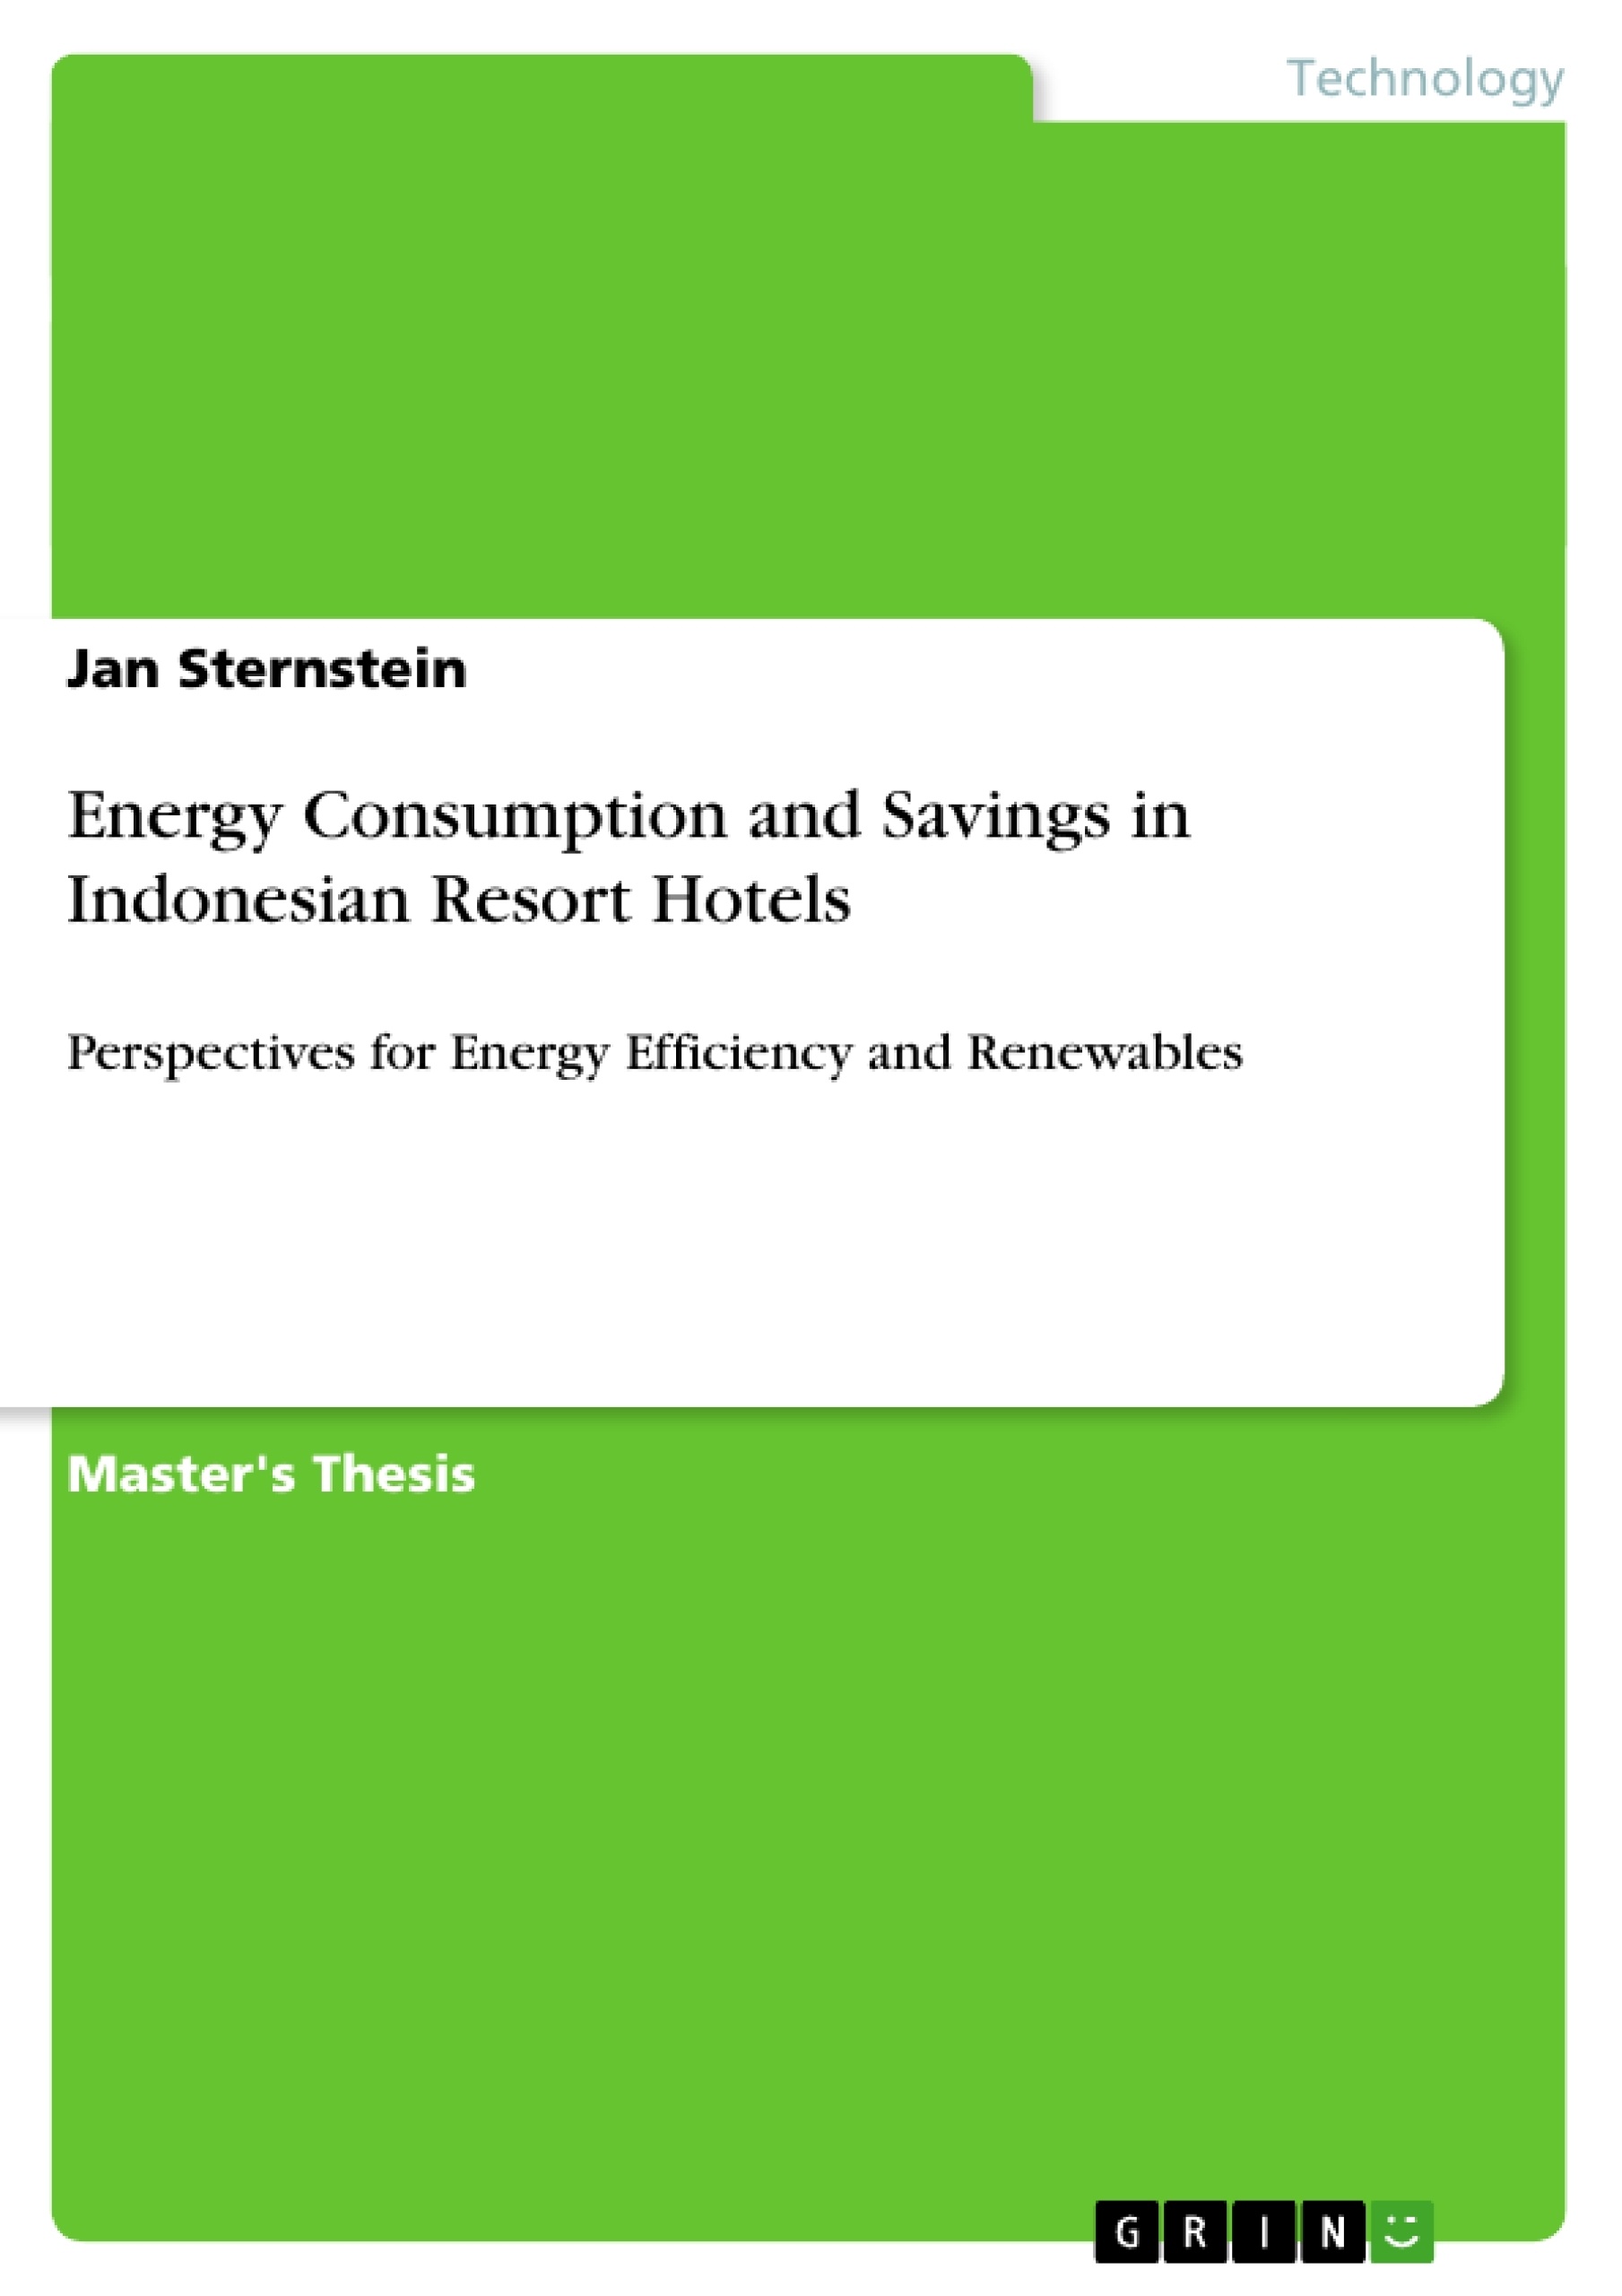 Title: Energy Consumption and Savings in Indonesian Resort Hotels